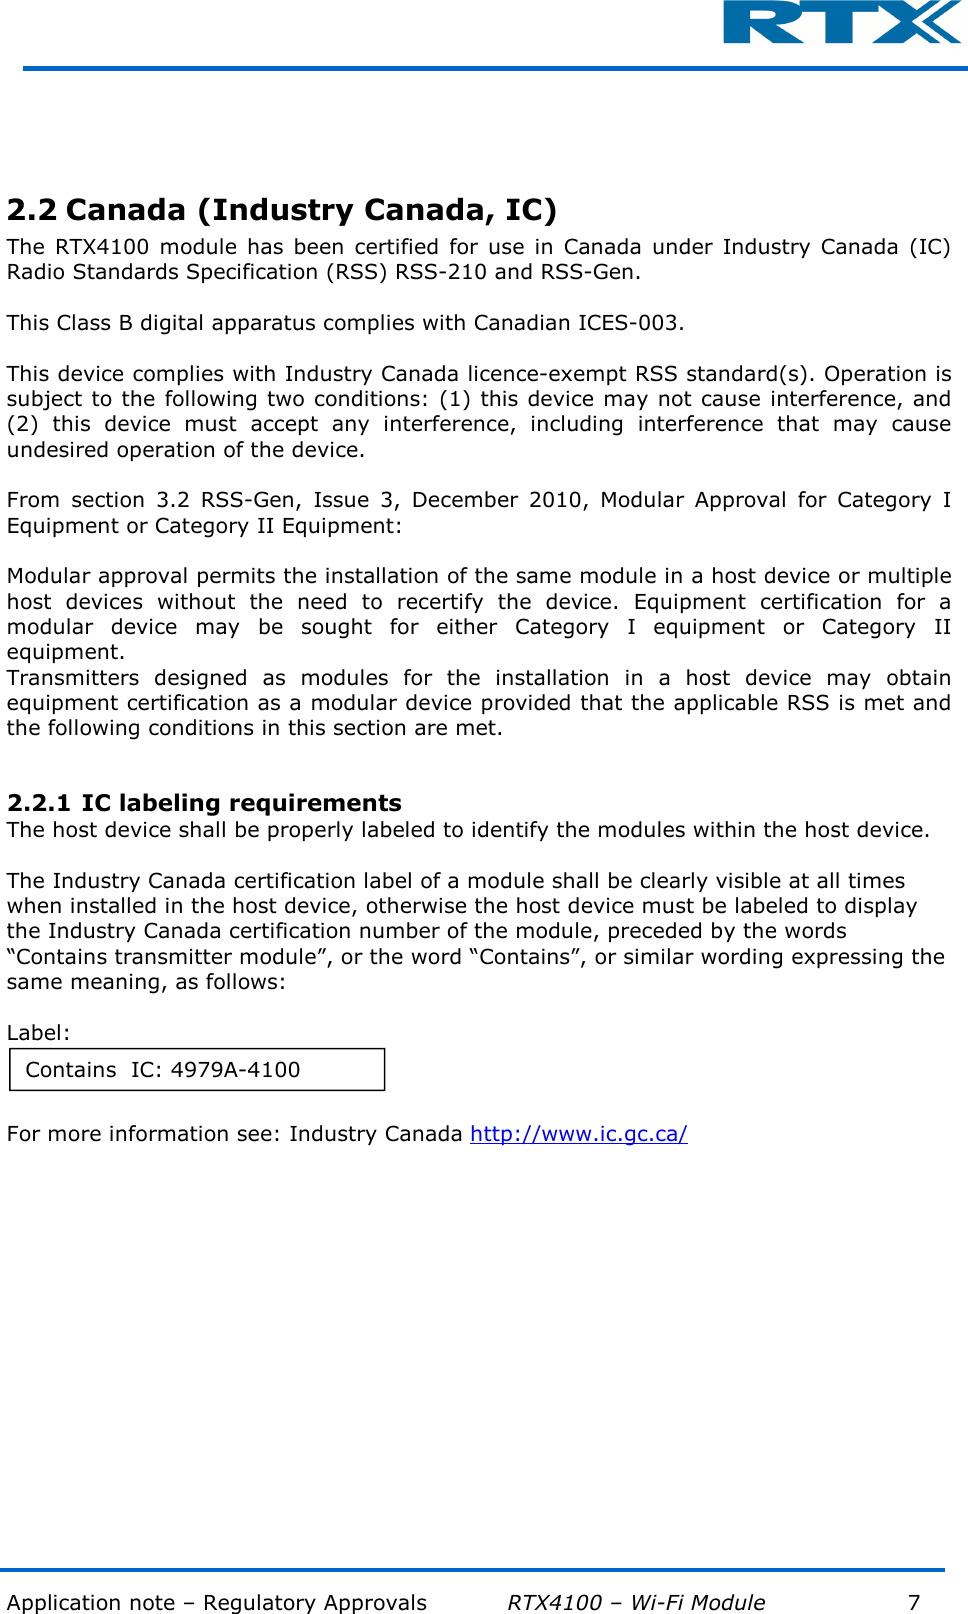  Application note – Regulatory Approvals           RTX4100 – Wi-Fi Module            7           2.2 Canada (Industry Canada, IC) The  RTX4100  module has been  certified  for  use in  Canada  under  Industry  Canada  (IC) Radio Standards Specification (RSS) RSS-210 and RSS-Gen.   This Class B digital apparatus complies with Canadian ICES-003.  This device complies with Industry Canada licence-exempt RSS standard(s). Operation is subject to the following two conditions: (1) this device may not cause interference, and (2)  this  device  must  accept  any  interference,  including  interference  that  may  cause undesired operation of the device.  From  section  3.2  RSS-Gen,  Issue  3,  December  2010,  Modular  Approval  for  Category  I Equipment or Category II Equipment:  Modular approval permits the installation of the same module in a host device or multiple host  devices  without  the  need  to  recertify  the  device.  Equipment  certification  for  a modular  device  may  be  sought  for  either  Category  I  equipment  or  Category  II equipment. Transmitters  designed  as  modules  for  the  installation  in  a  host  device  may  obtain equipment certification as a modular device provided that the applicable RSS is met and the following conditions in this section are met.  2.2.1 IC labeling requirements The host device shall be properly labeled to identify the modules within the host device.  The Industry Canada certification label of a module shall be clearly visible at all times when installed in the host device, otherwise the host device must be labeled to display the Industry Canada certification number of the module, preceded by the words “Contains transmitter module”, or the word “Contains”, or similar wording expressing the same meaning, as follows:  Label:  For more information see: Industry Canada http://www.ic.gc.ca/    Contains  IC: 4979A-4100 